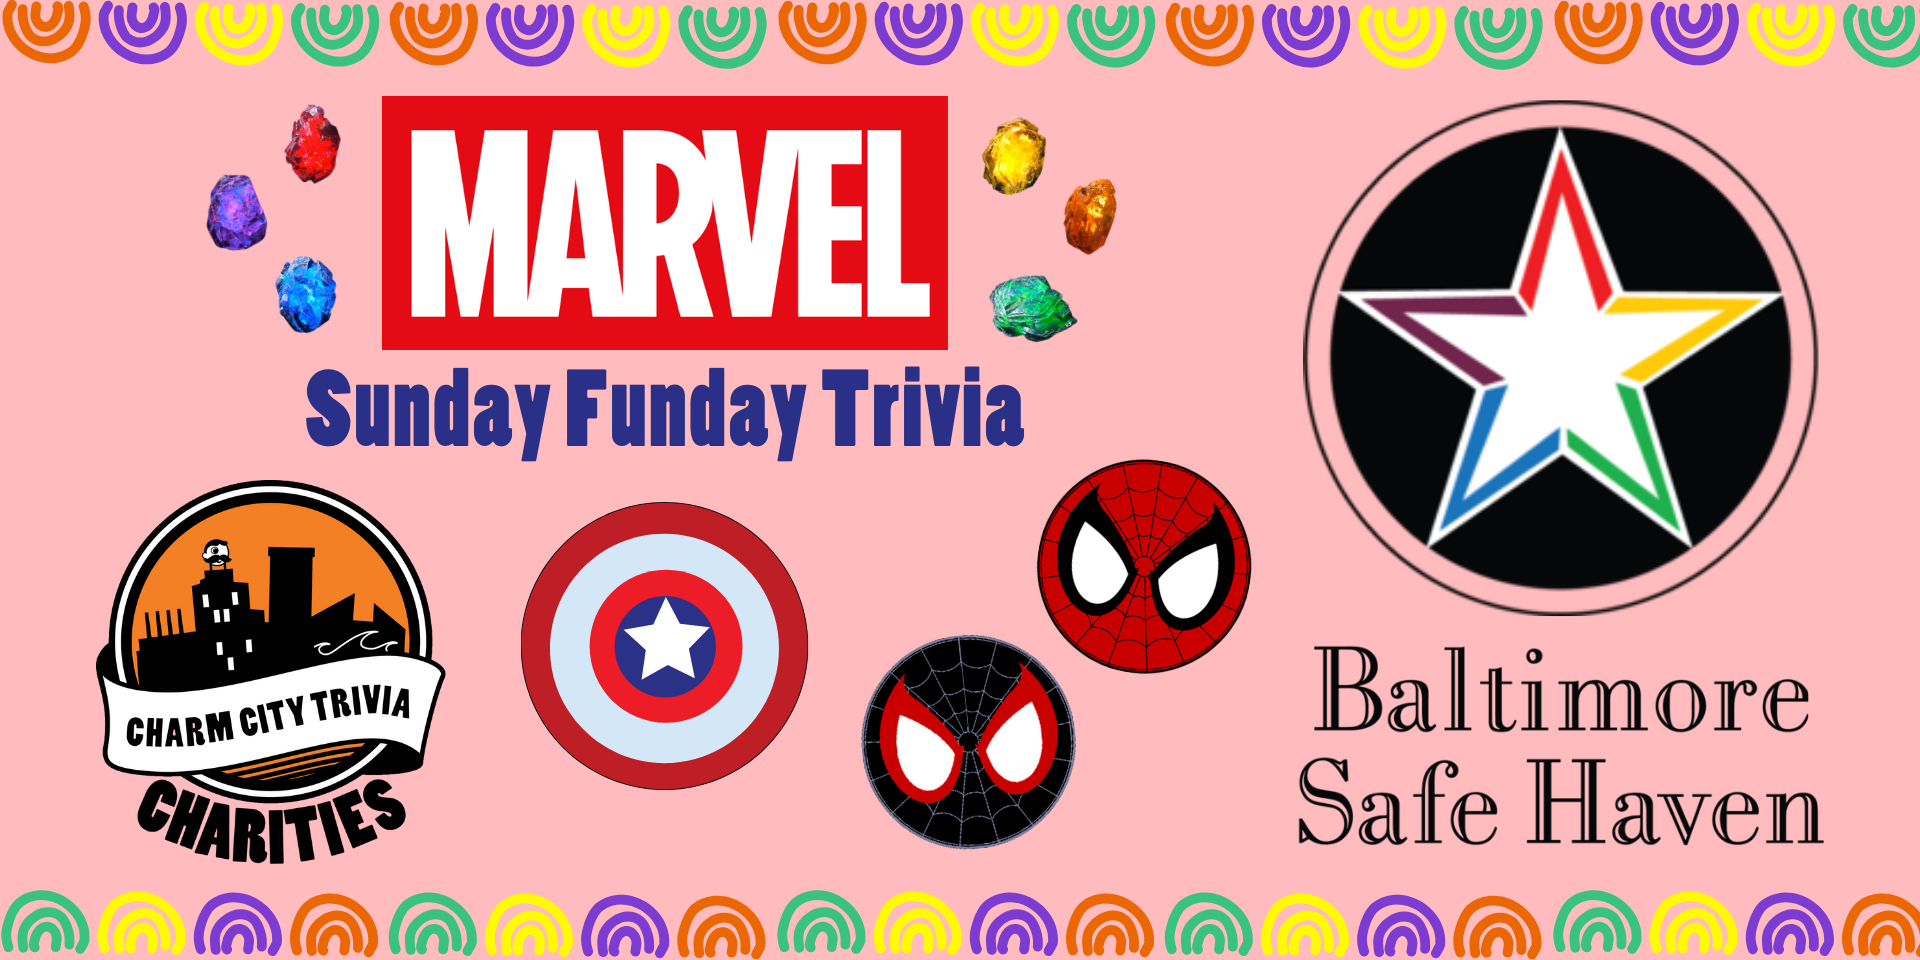 a pink background with a colorful border, the Charm City Trivia Charities logo, the Baltimore Safe Haven logo, the Marvel logo, the infinity stones, captain america's shield, peter parker's & miles morales' spider-man masks, and dark blue text. The text reads: Sunday Funday Trivia